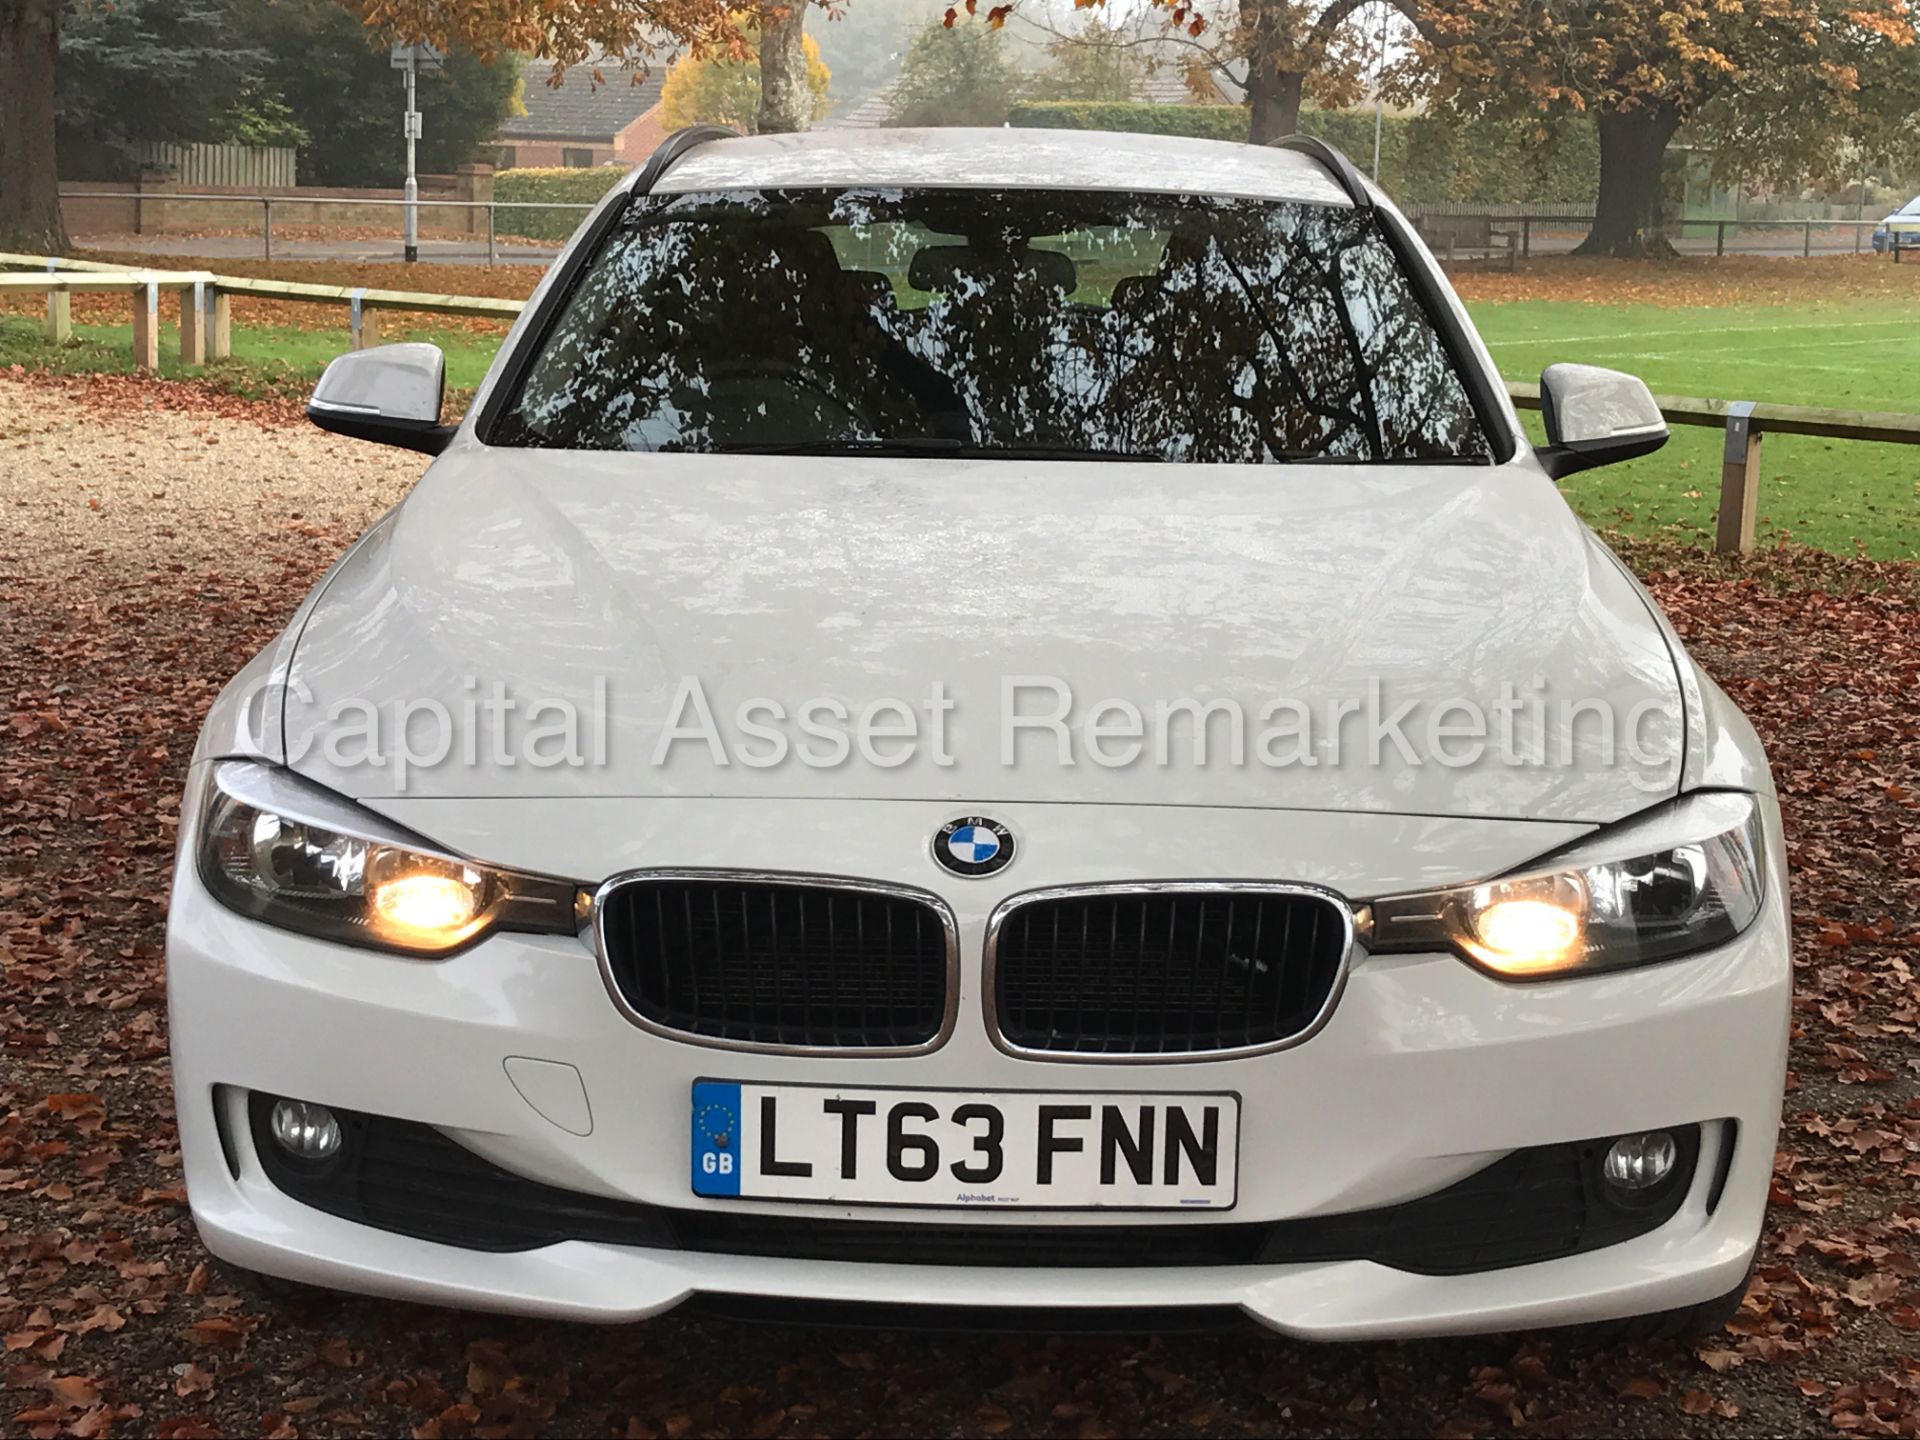 BMW 320d 'ESTATE / TOURING' (2014 MODEL) 8 SPEED AUTO - SAT NAV **FULLY LOADED** (1 OWNER FROM NEW) - Image 3 of 25